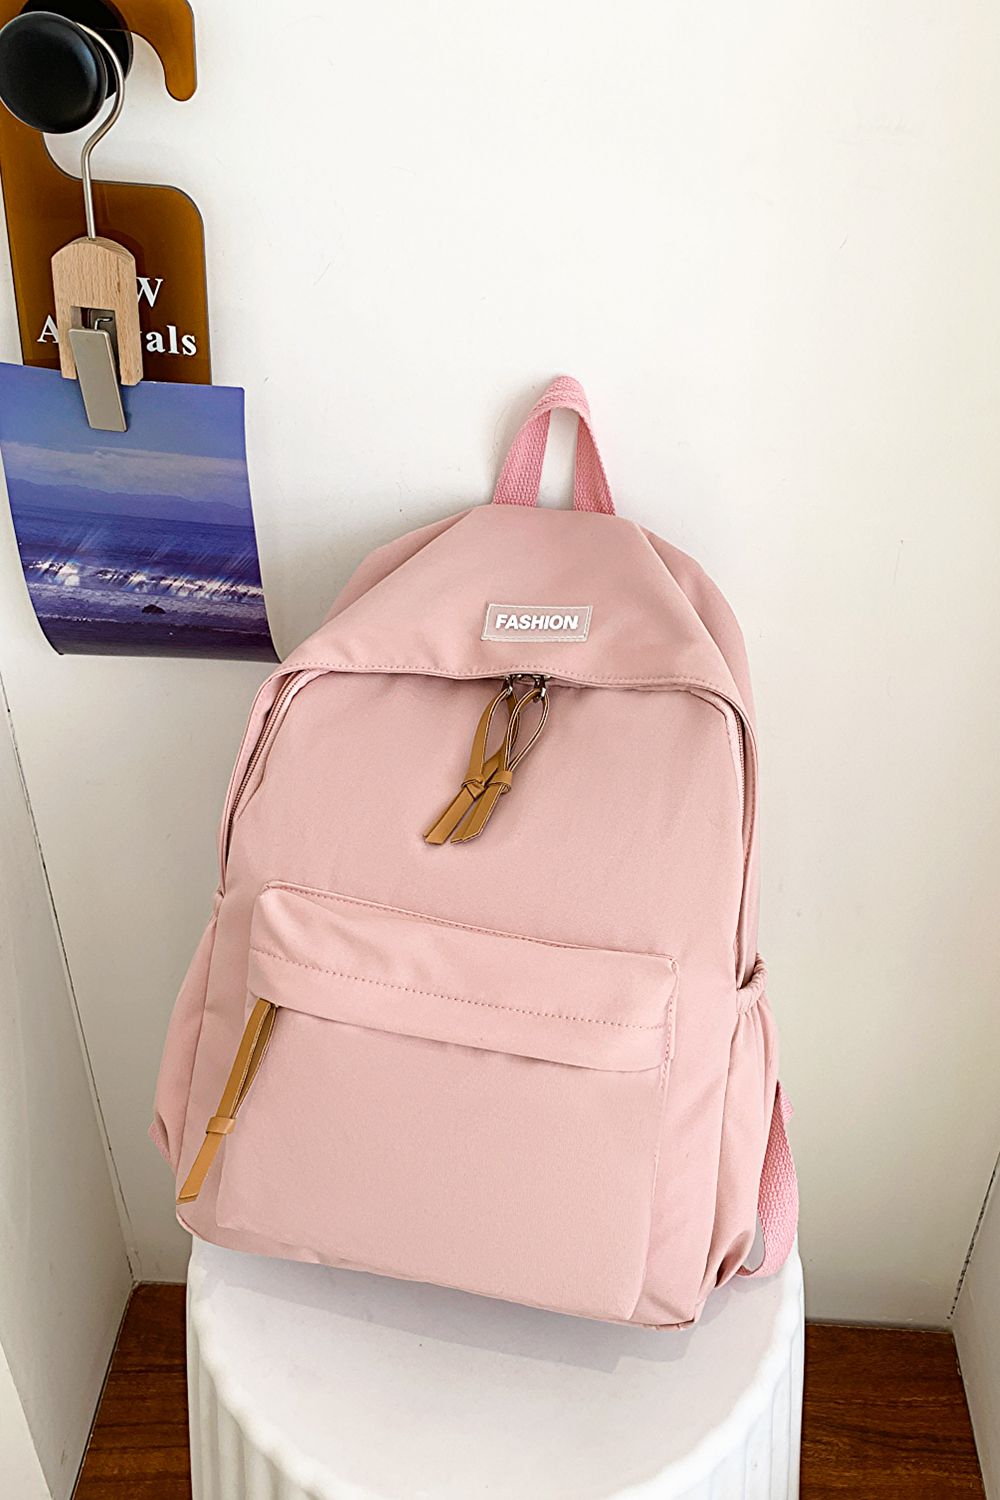 FASHION Polyester Lilac Lavender Backpack